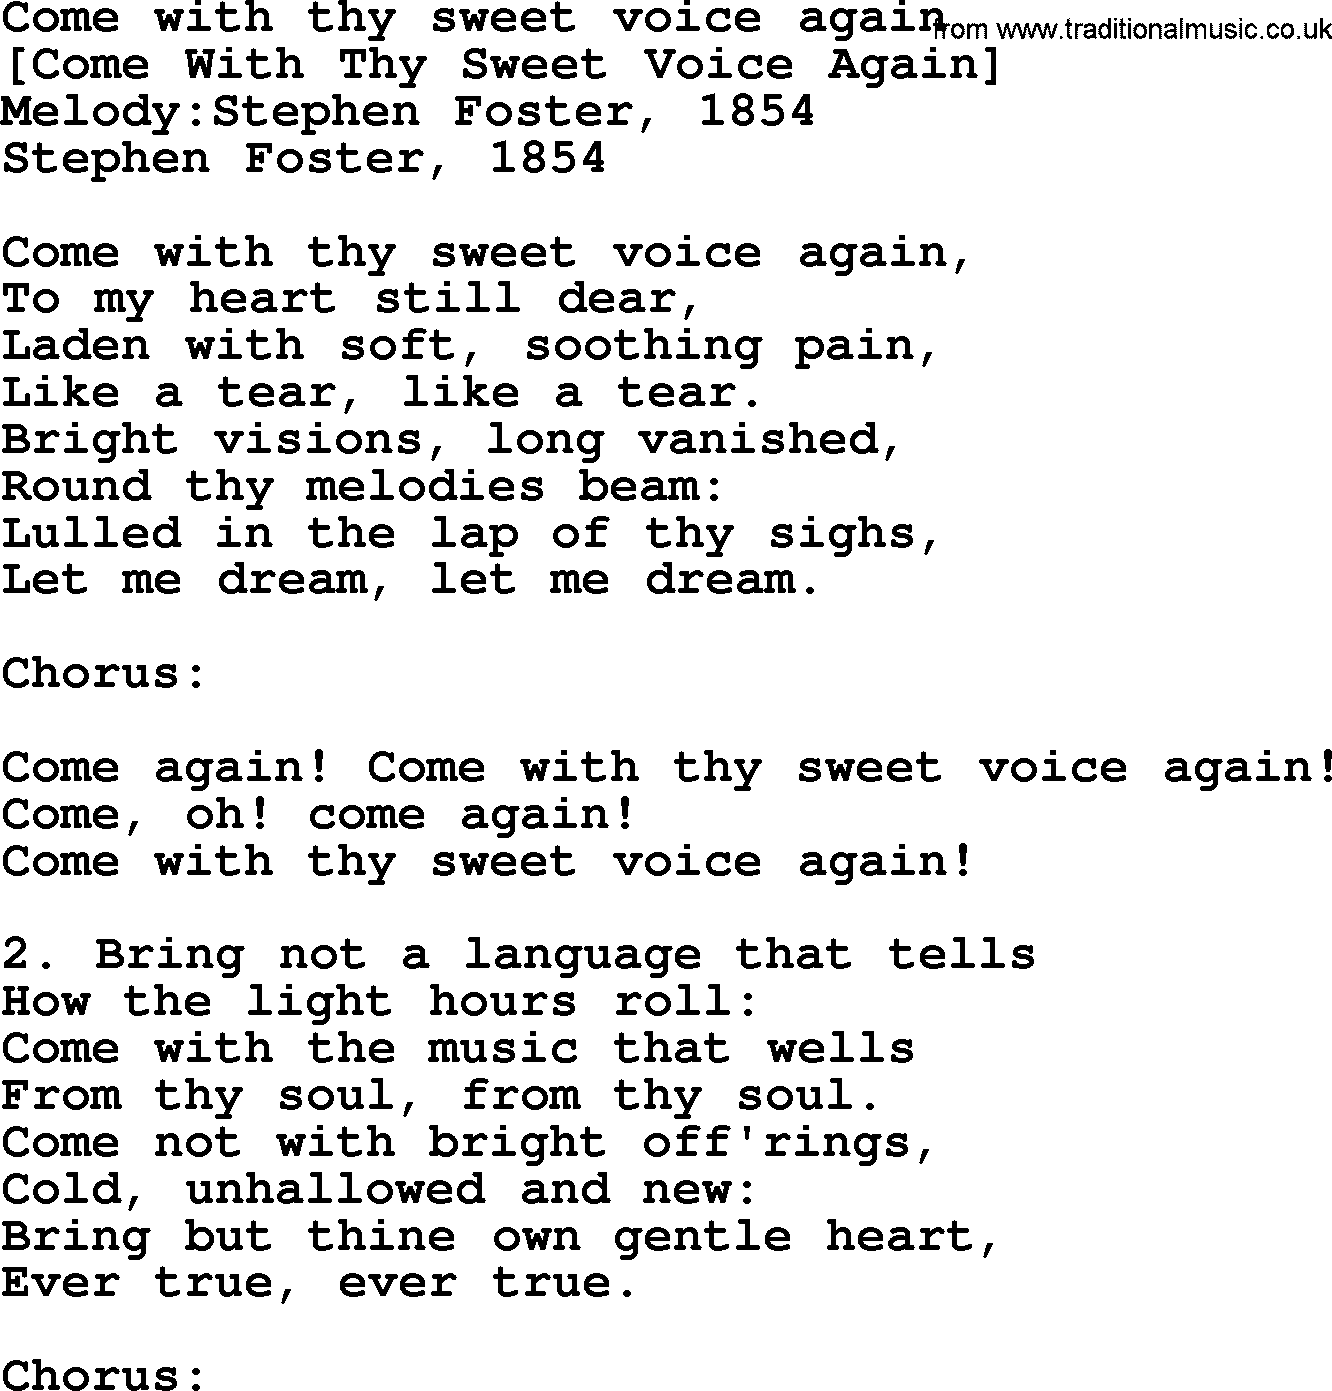 Old American Song: Come With Thy Sweet Voice Again, lyrics